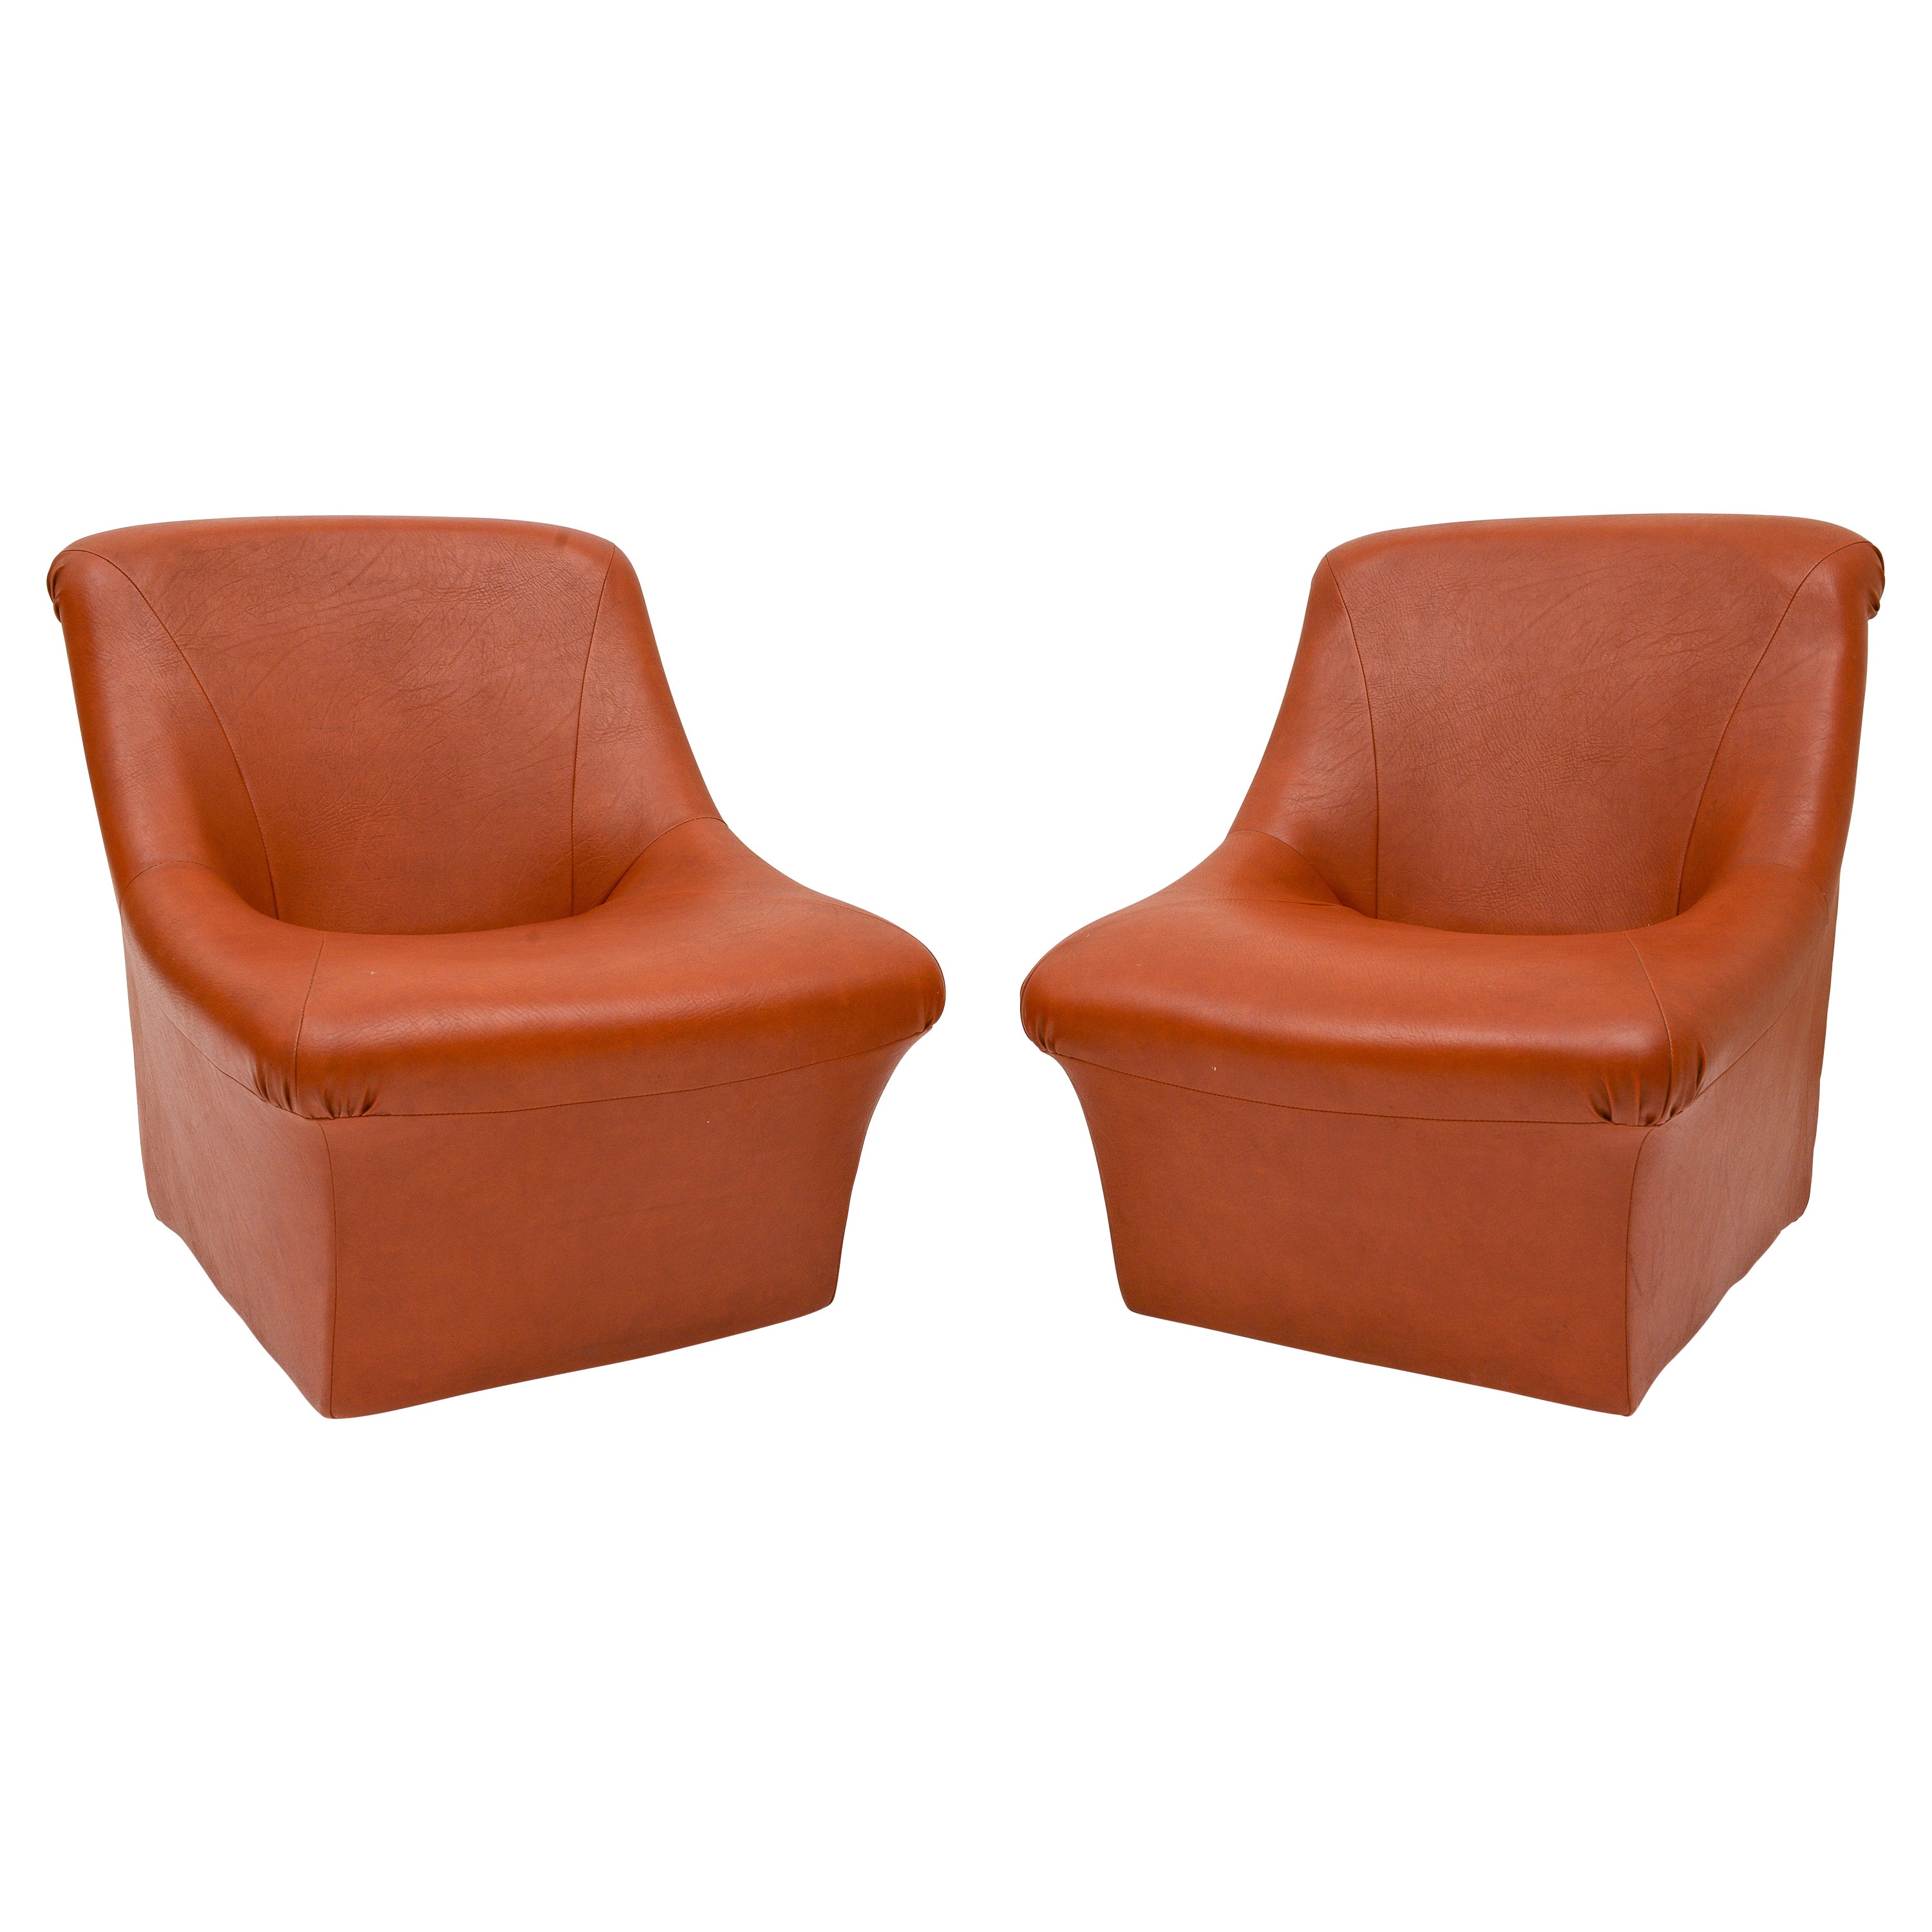 70's brown cognac leatherette pair of chairs, cool and stylish. They are very comfortable. Imported from France.